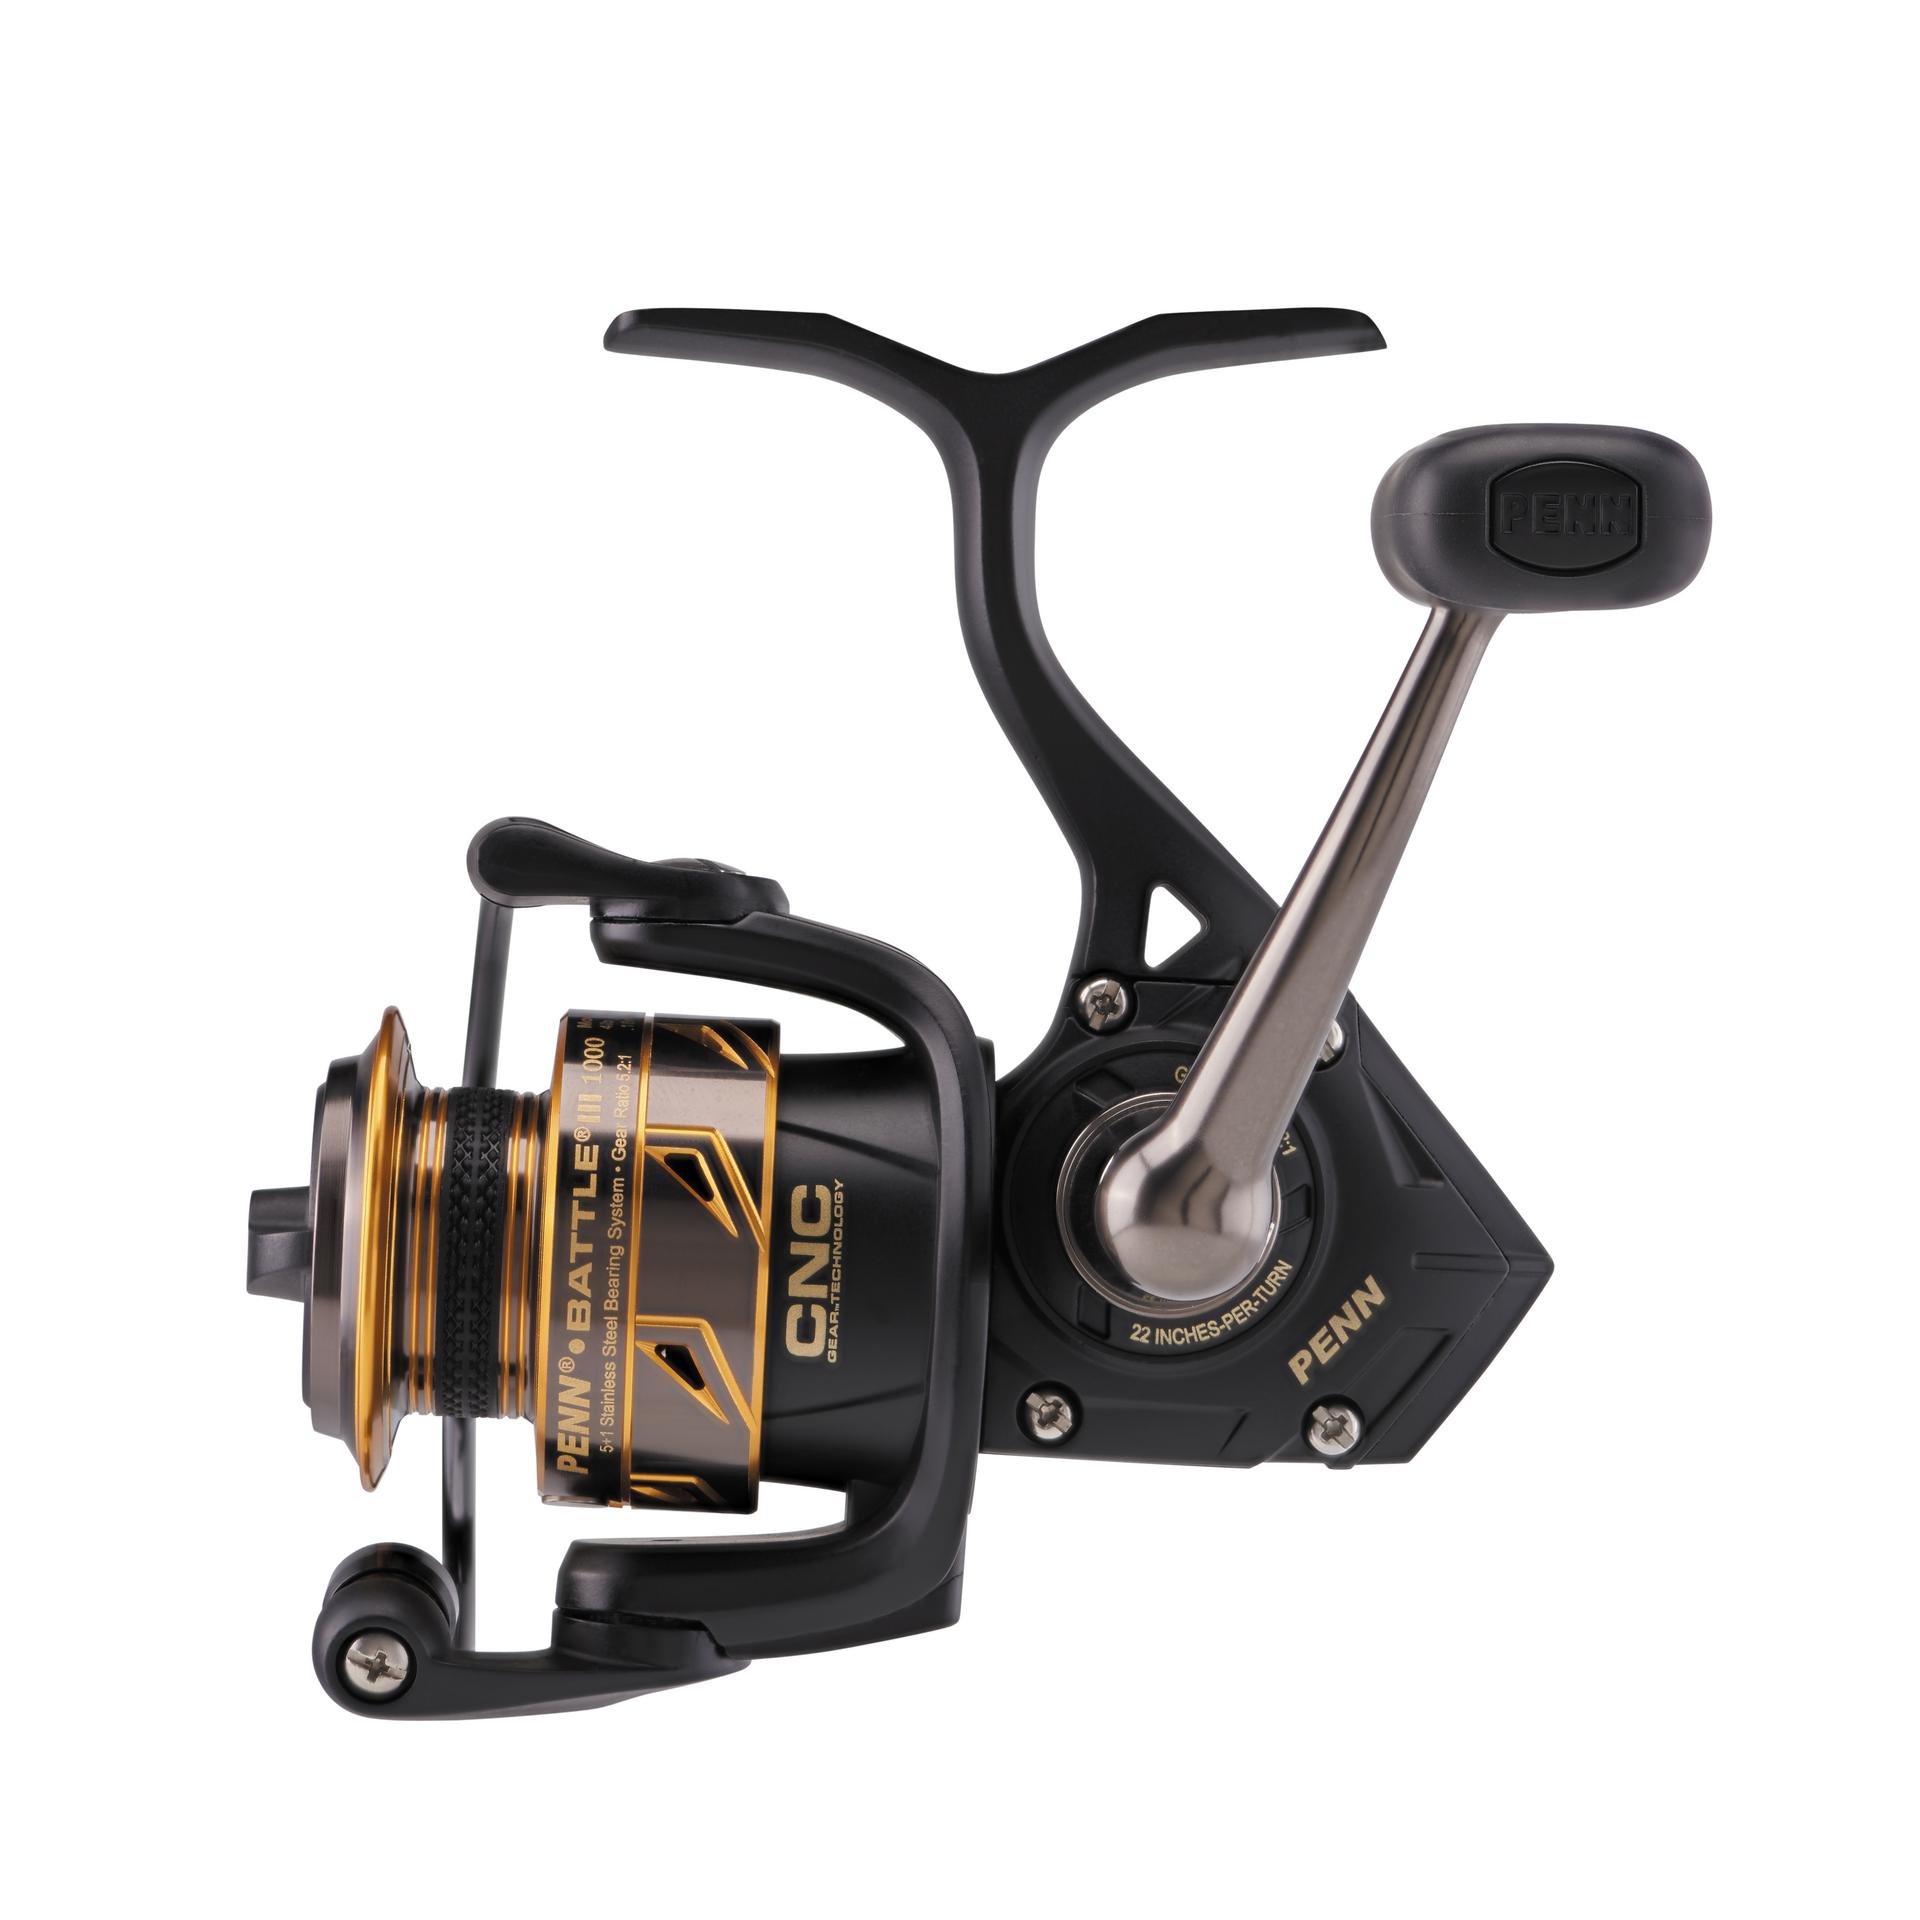  Penn Fishing Tackle Penn Conflict 8Bb 6.2 Spin